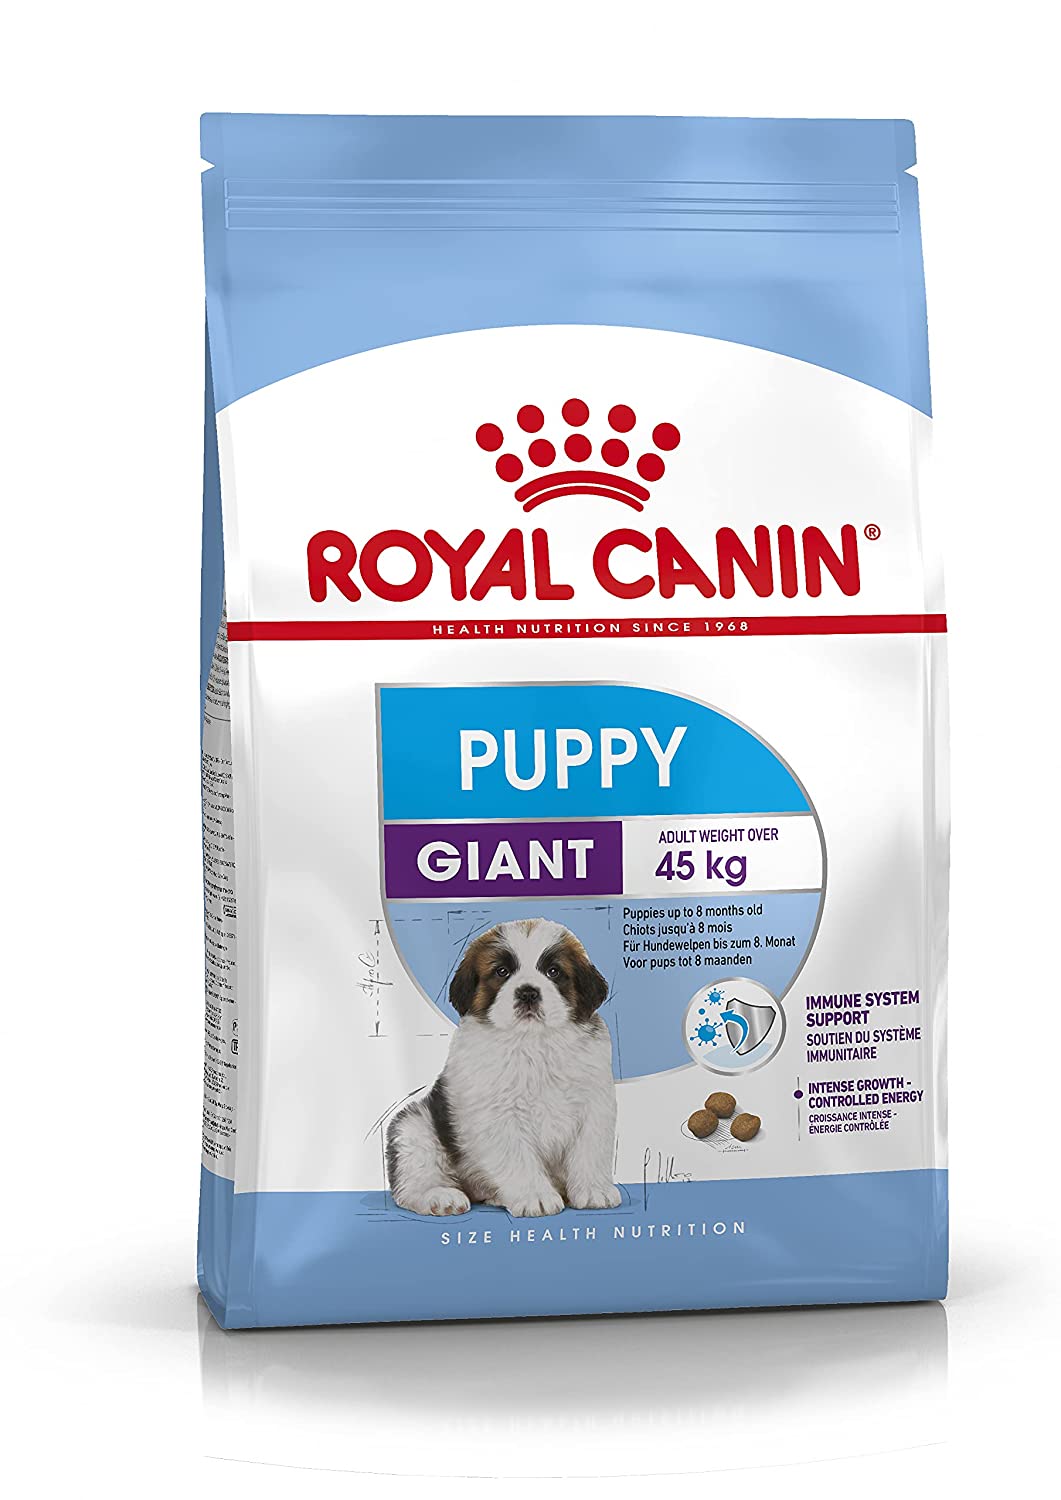 GIANT PUPPY – ROYAL CANIN